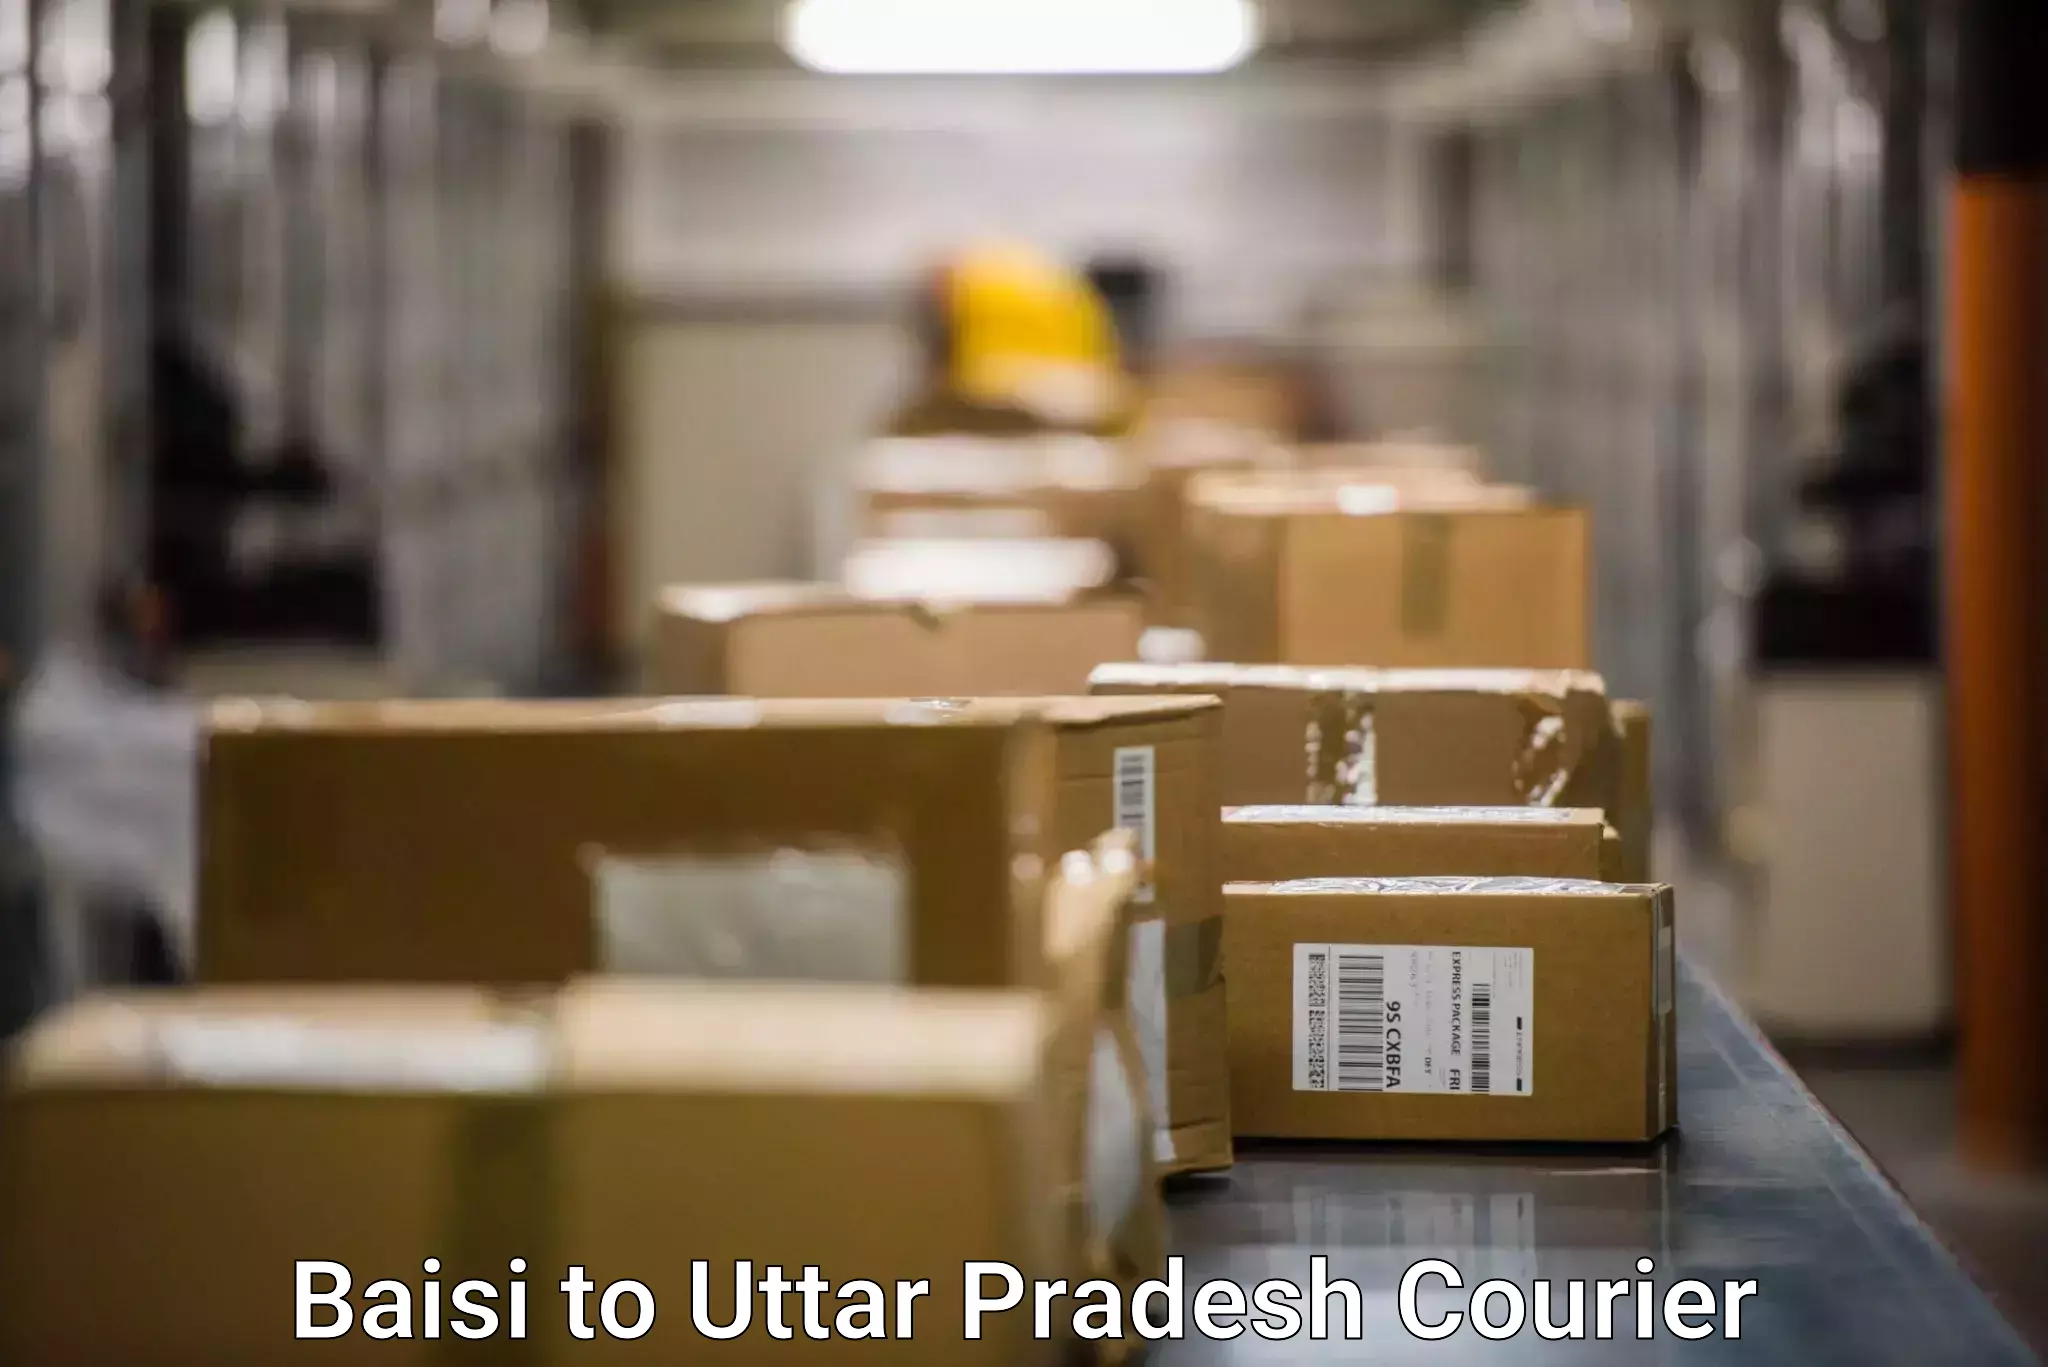 Courier services in Baisi to Moradabad